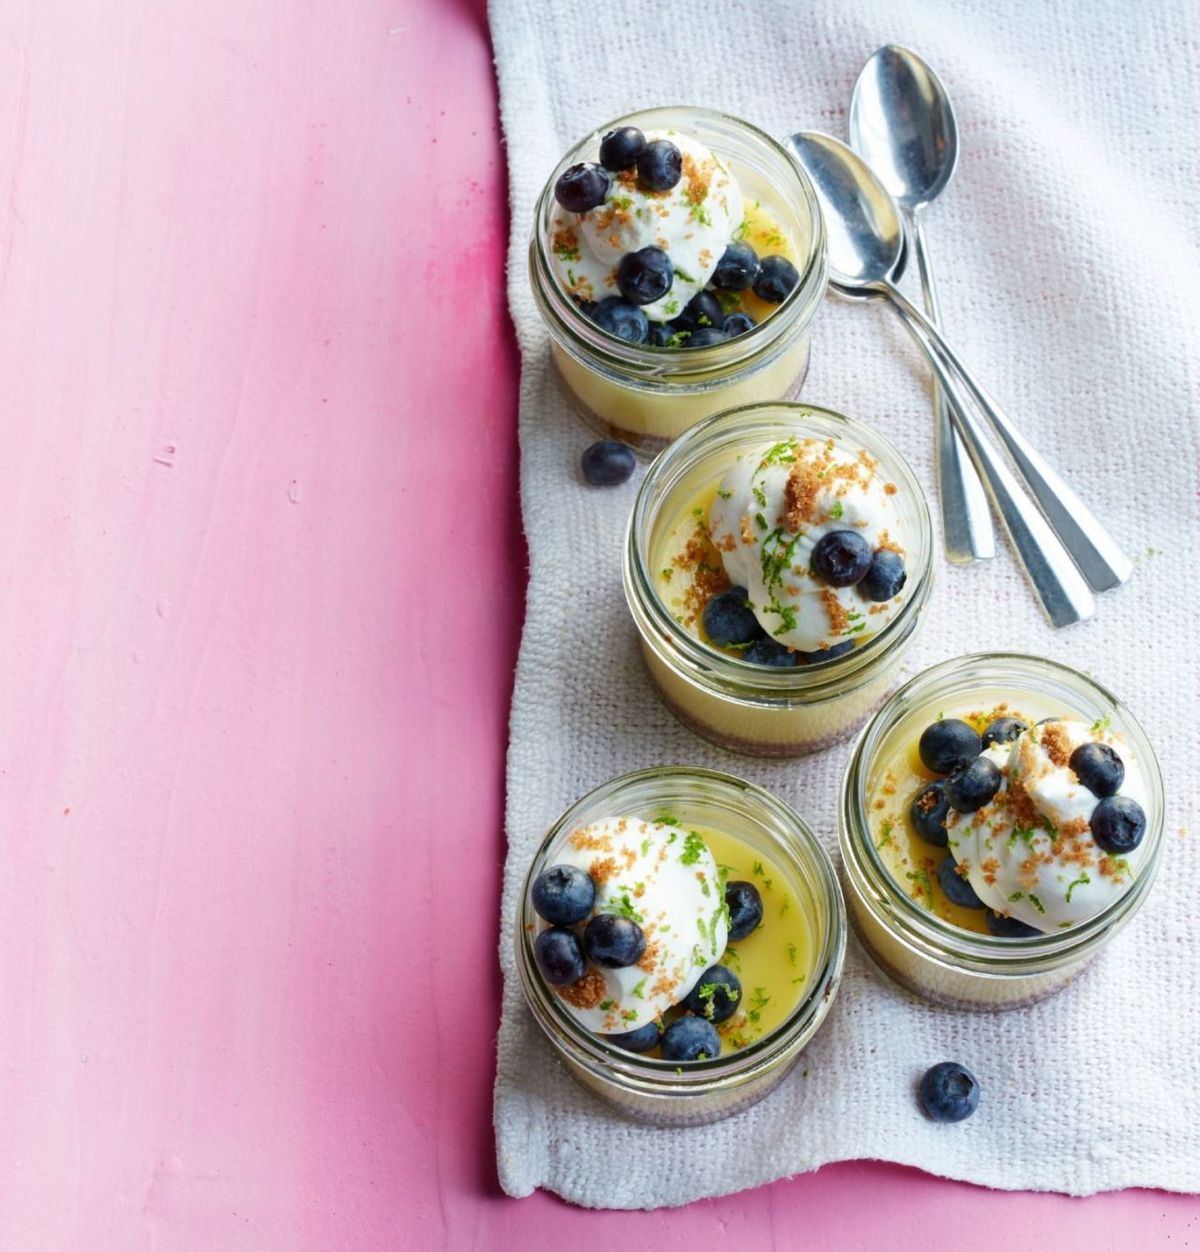 Key Lime and Blueberry Pies in Jars